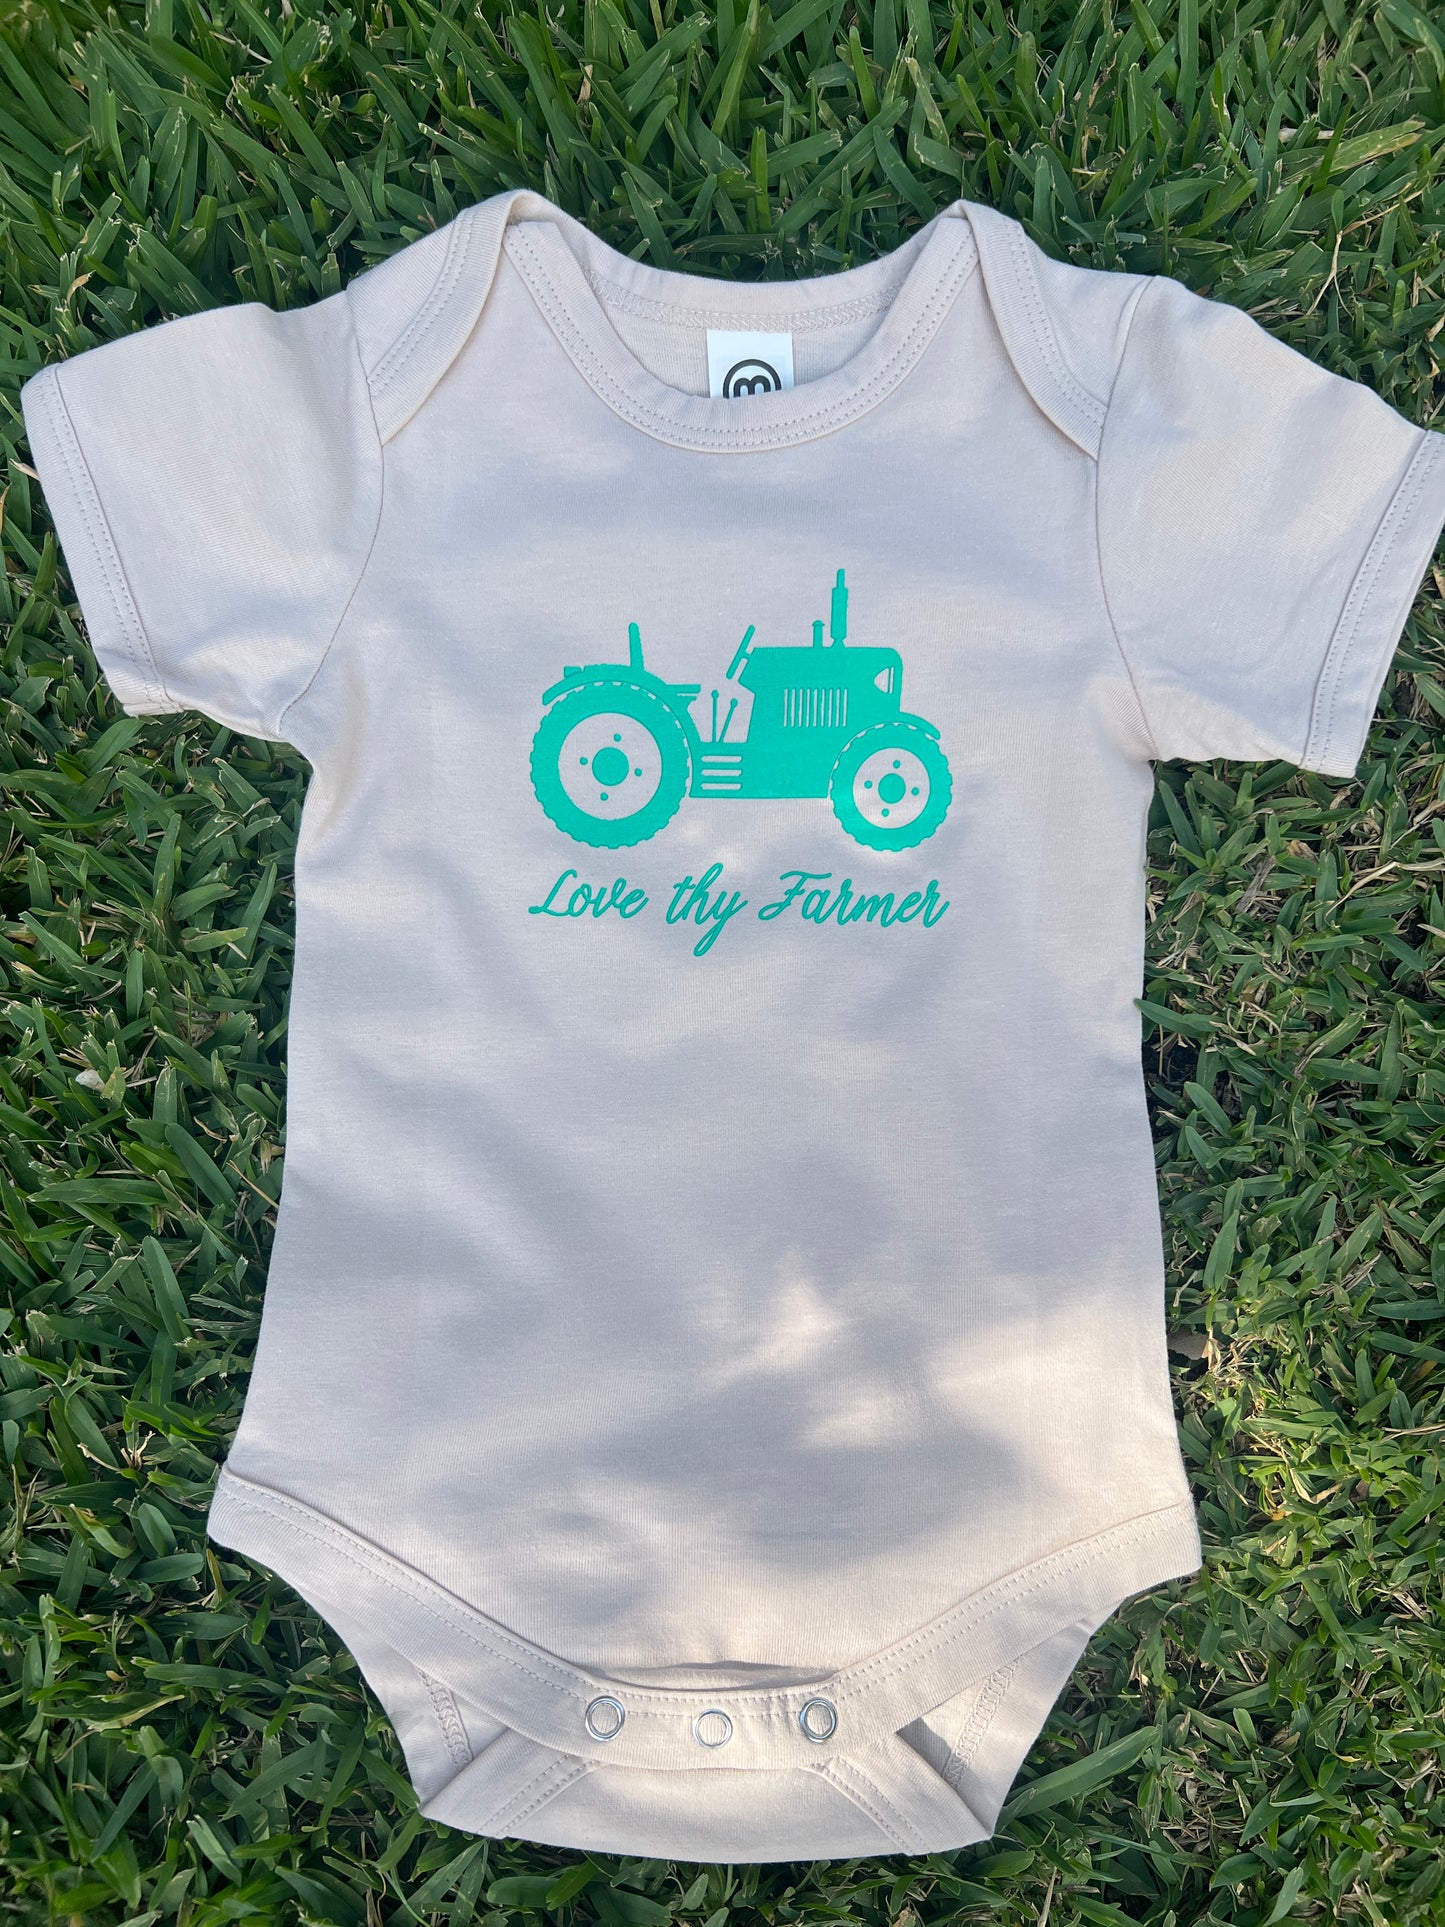 Short Sleeve Tractor Onesie in Grey/Blush Pink with Pink Printing and Dust with Green Printing